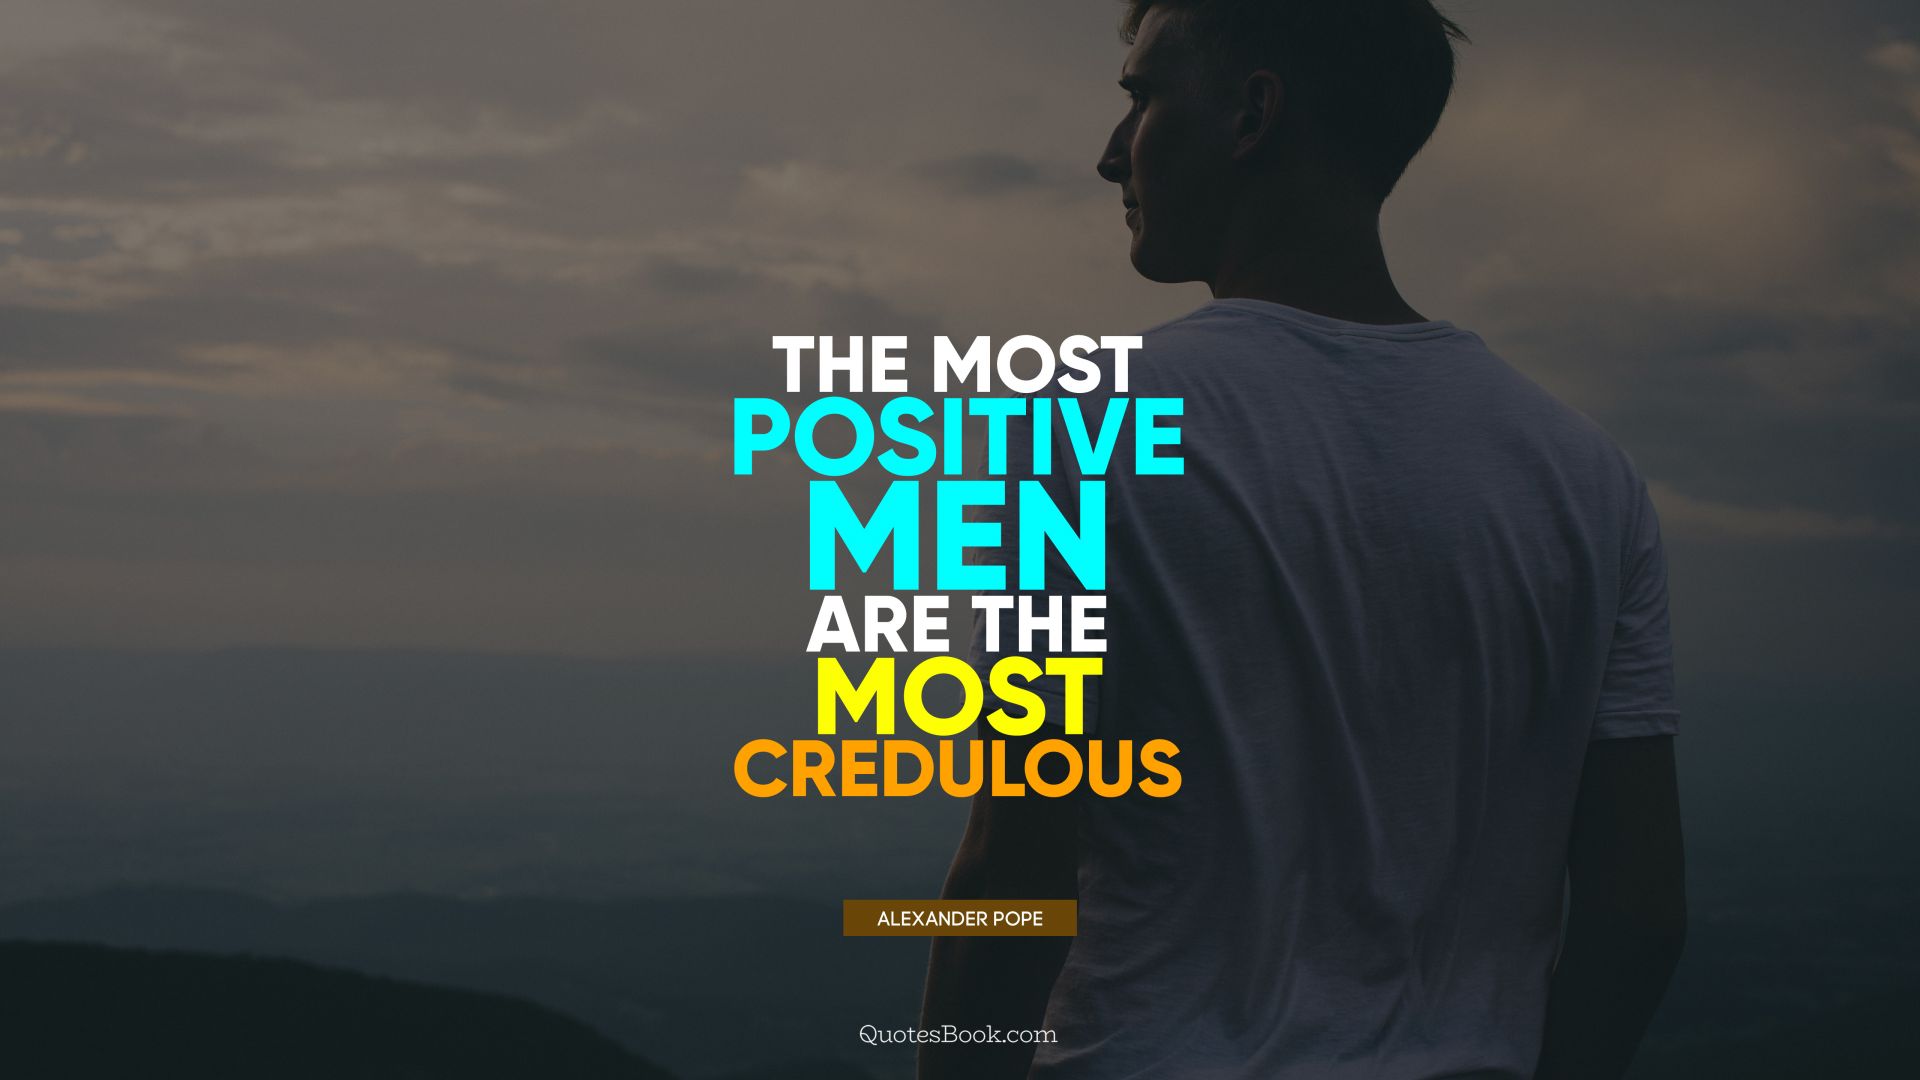 The most positive men are the most credulous. - Quote by Alexander Pope